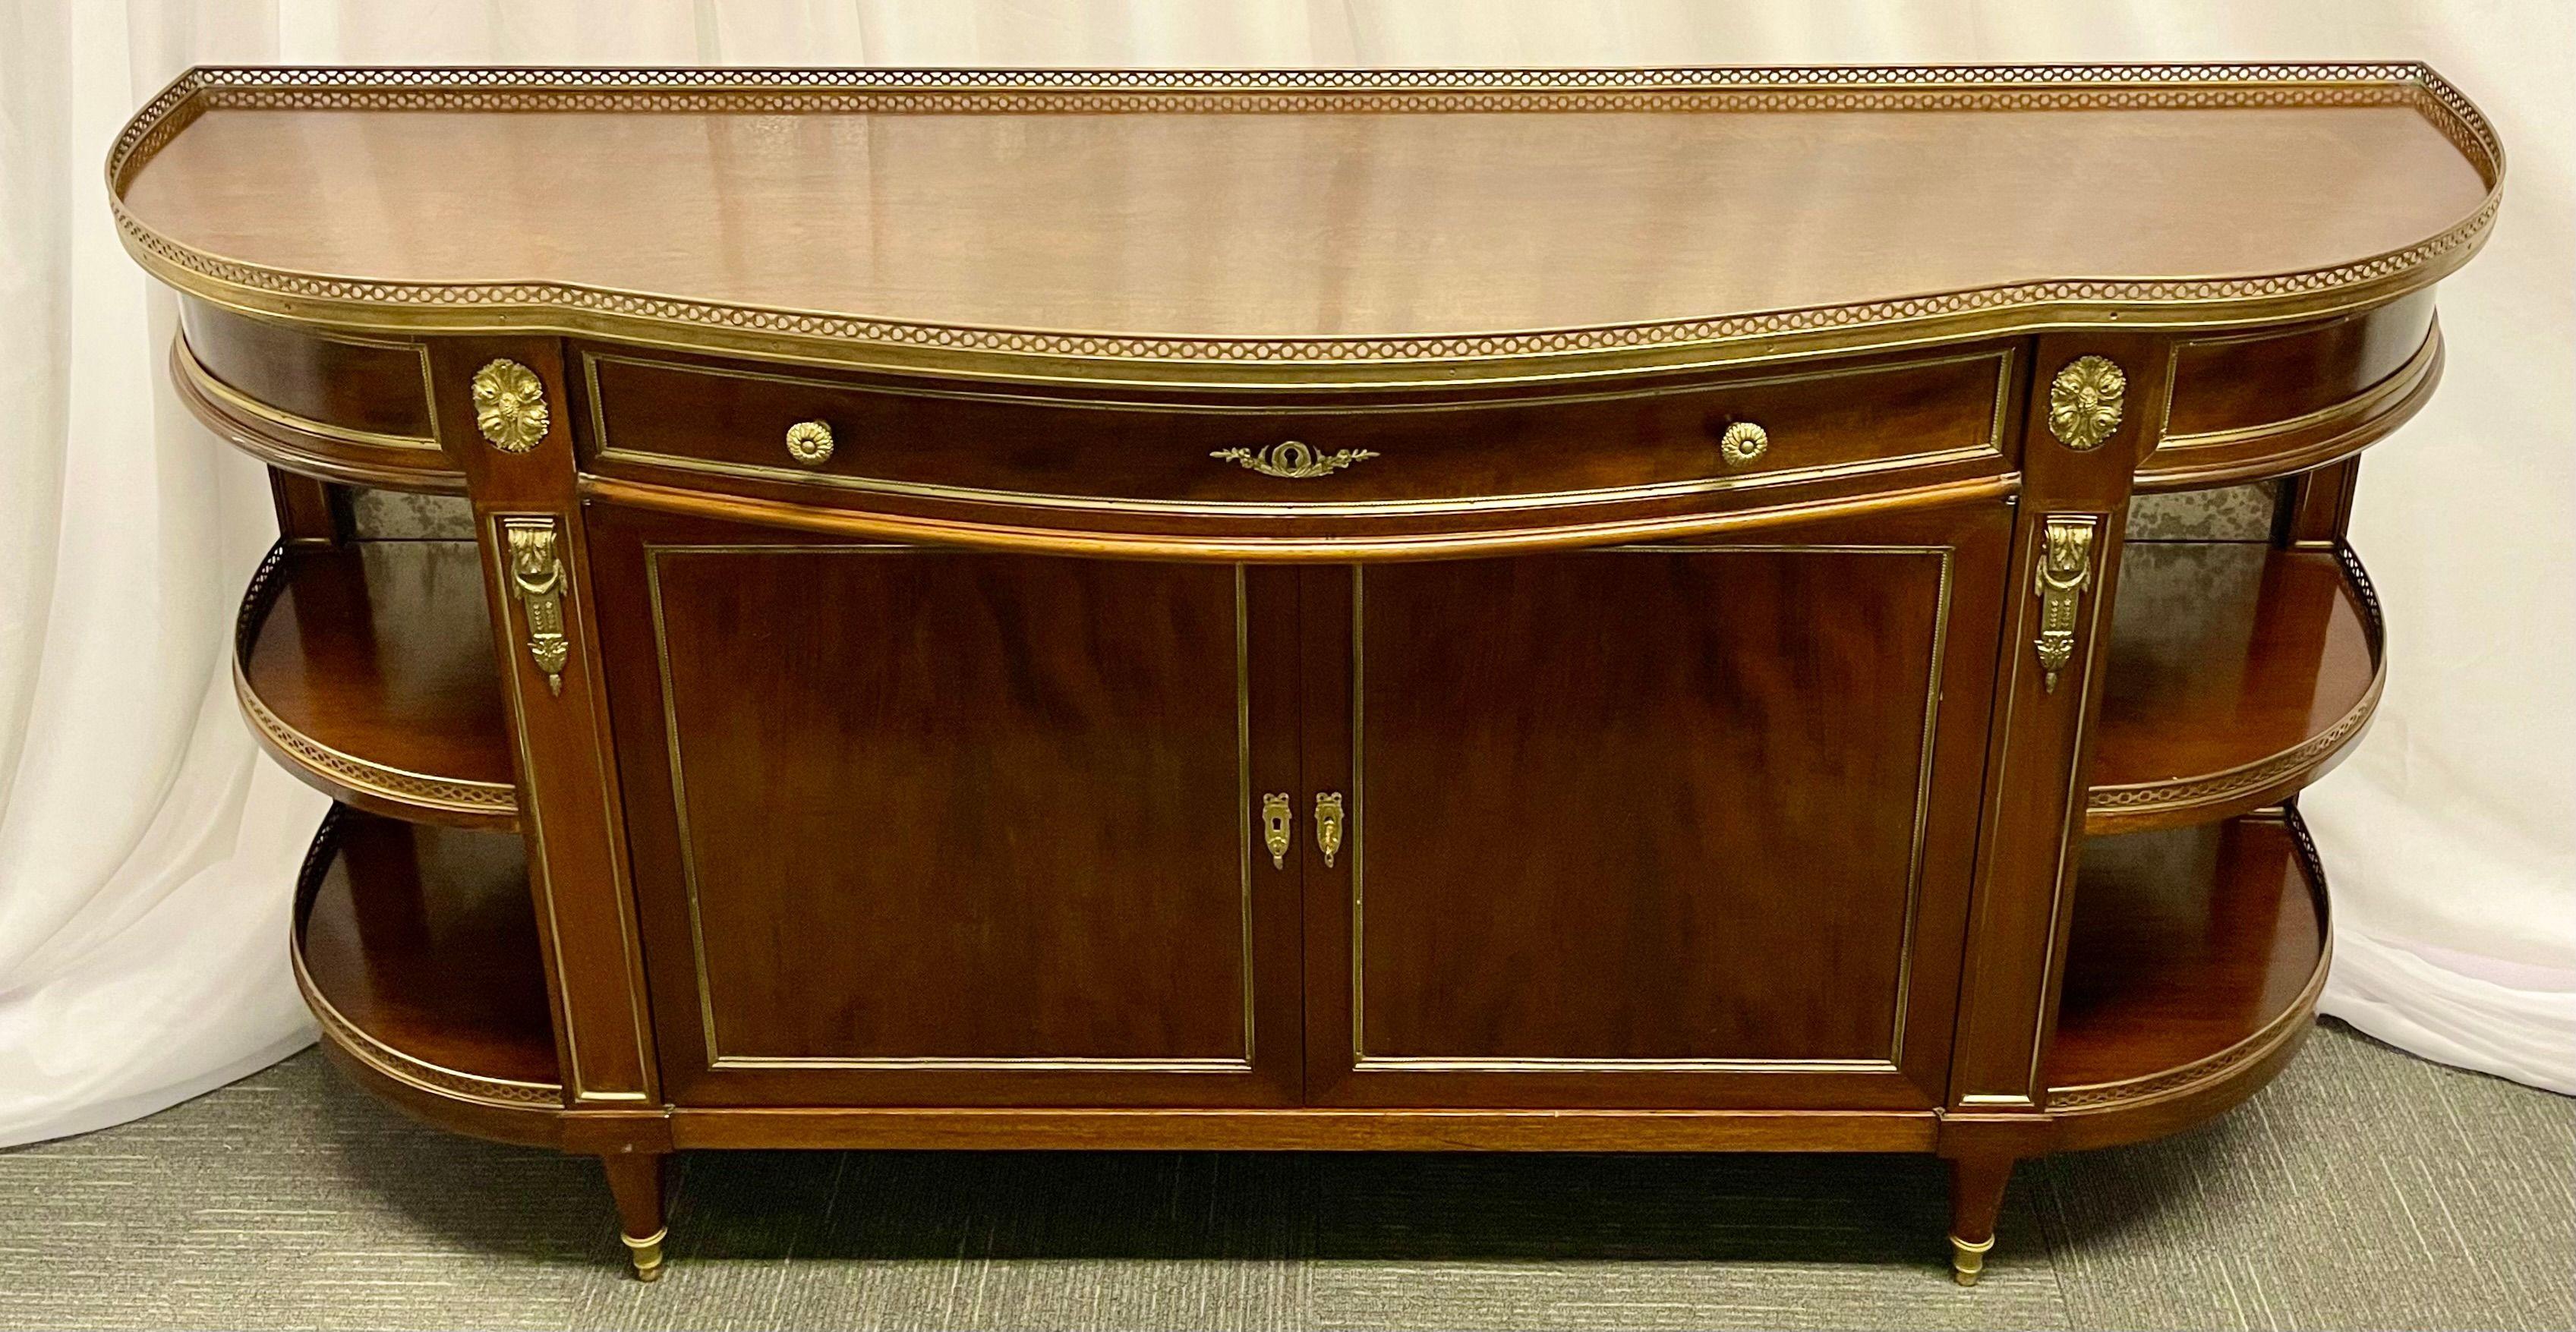 Georgian Attributed to Maison Jansen Flame Mahogany Demilune Server Sideboard